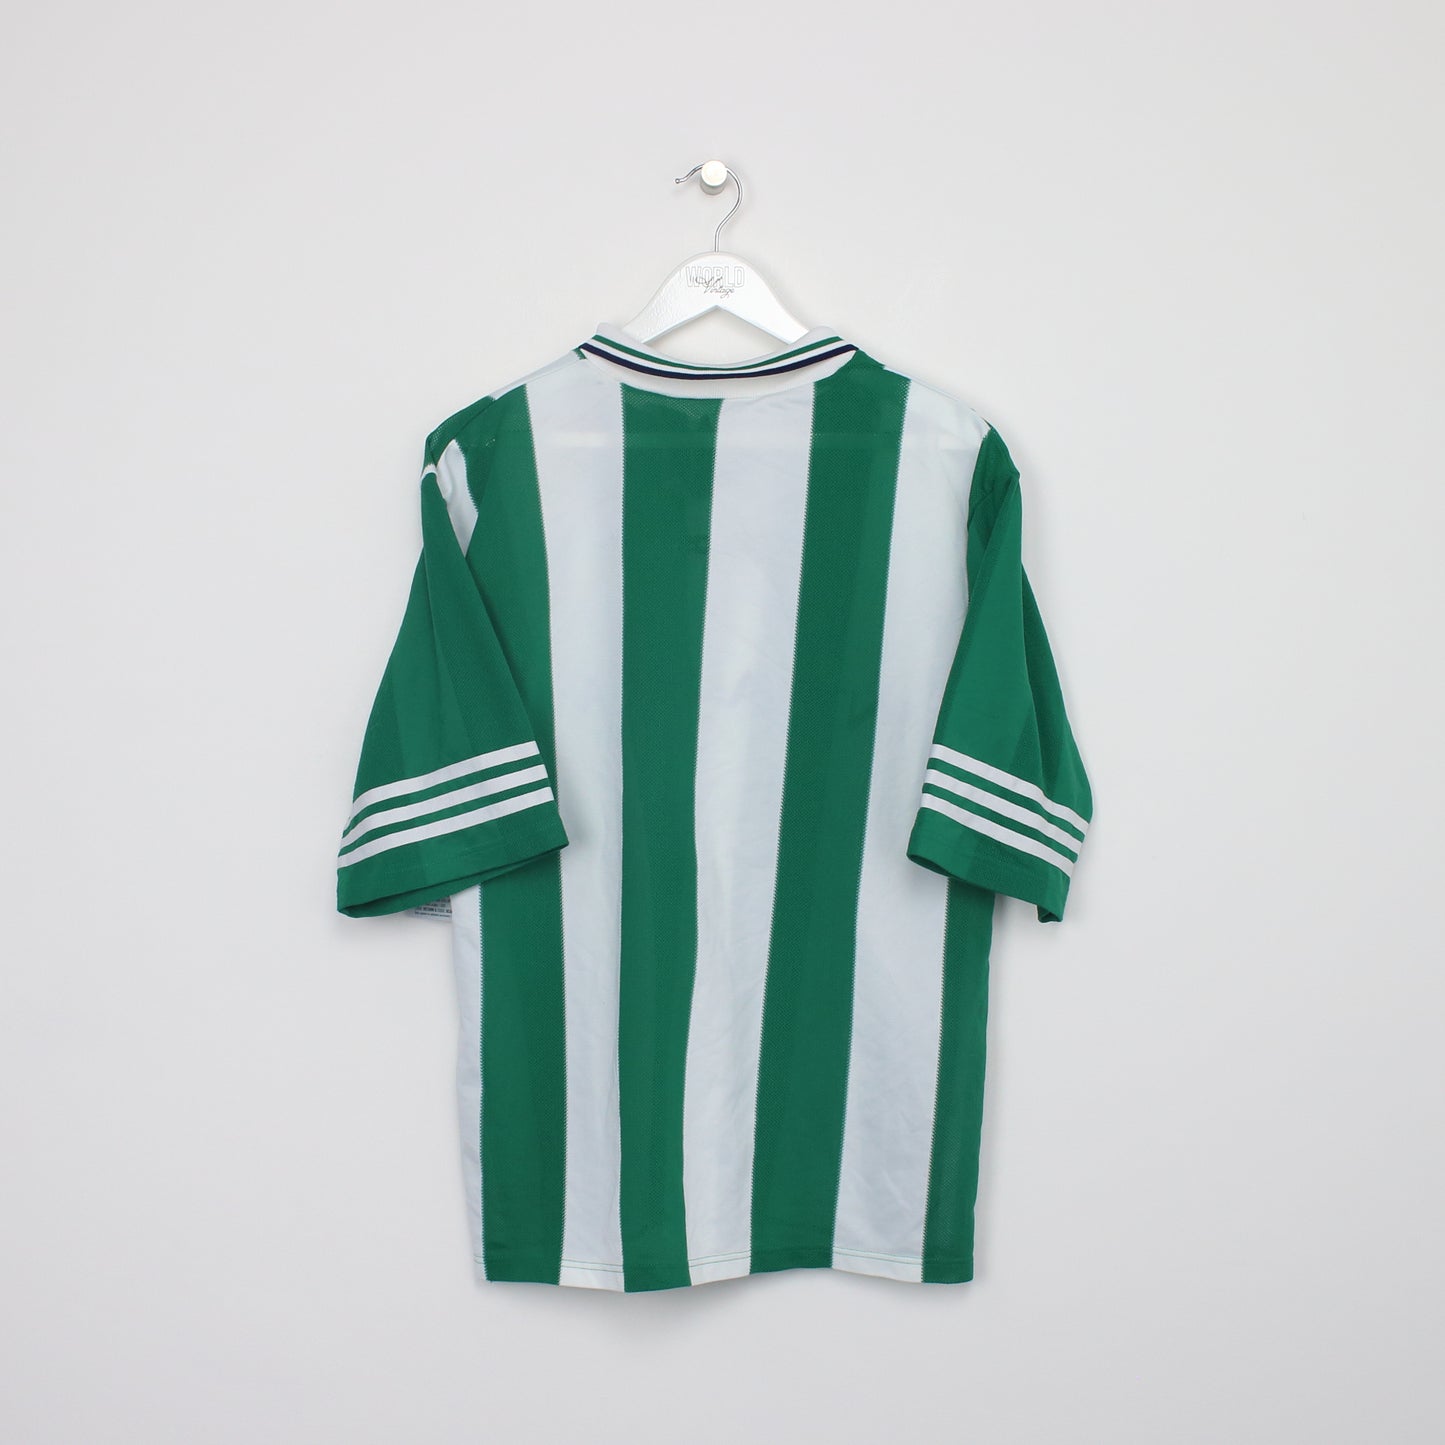 Vintage Adidas Amateur team football shirt in green and white. Best fits M